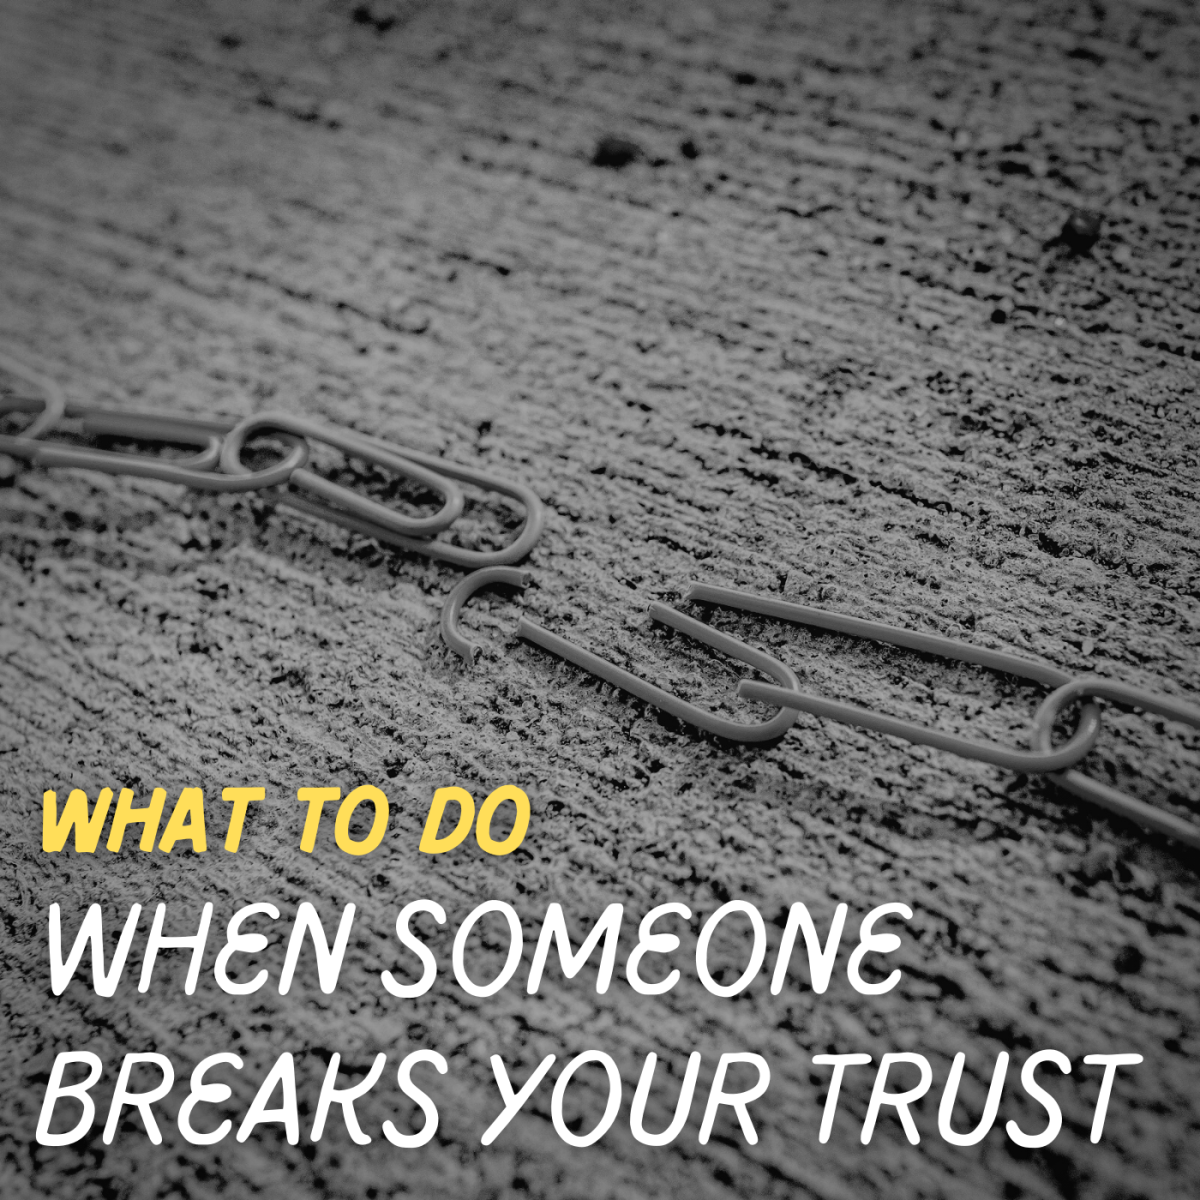 How to Deal With People Who Have Broken Your Trust